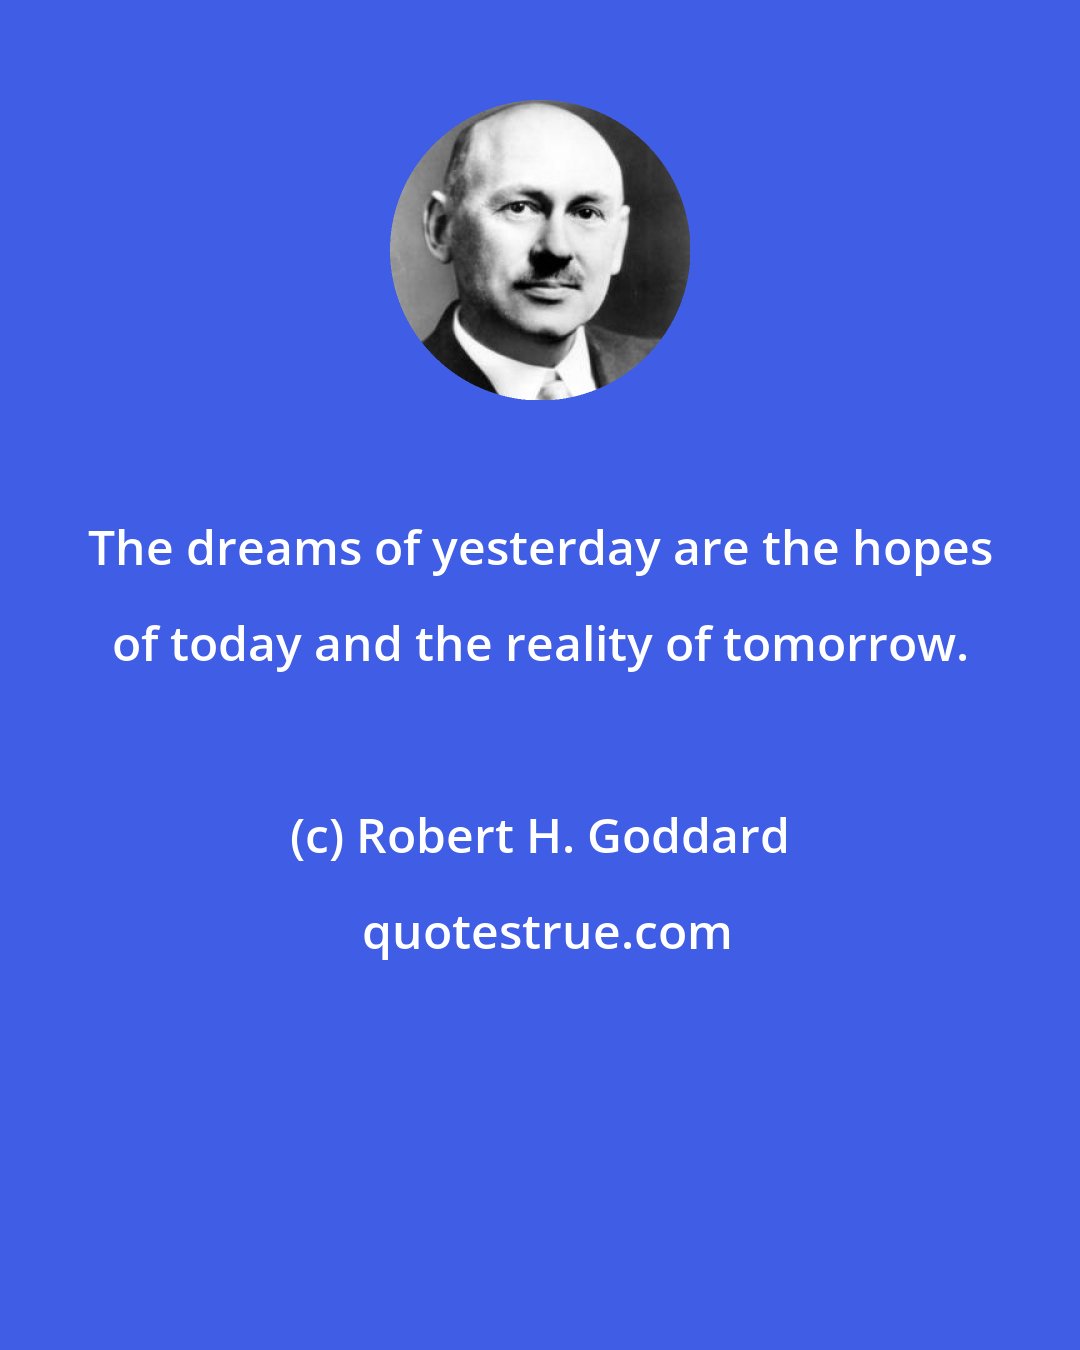 Robert H. Goddard: The dreams of yesterday are the hopes of today and the reality of tomorrow.